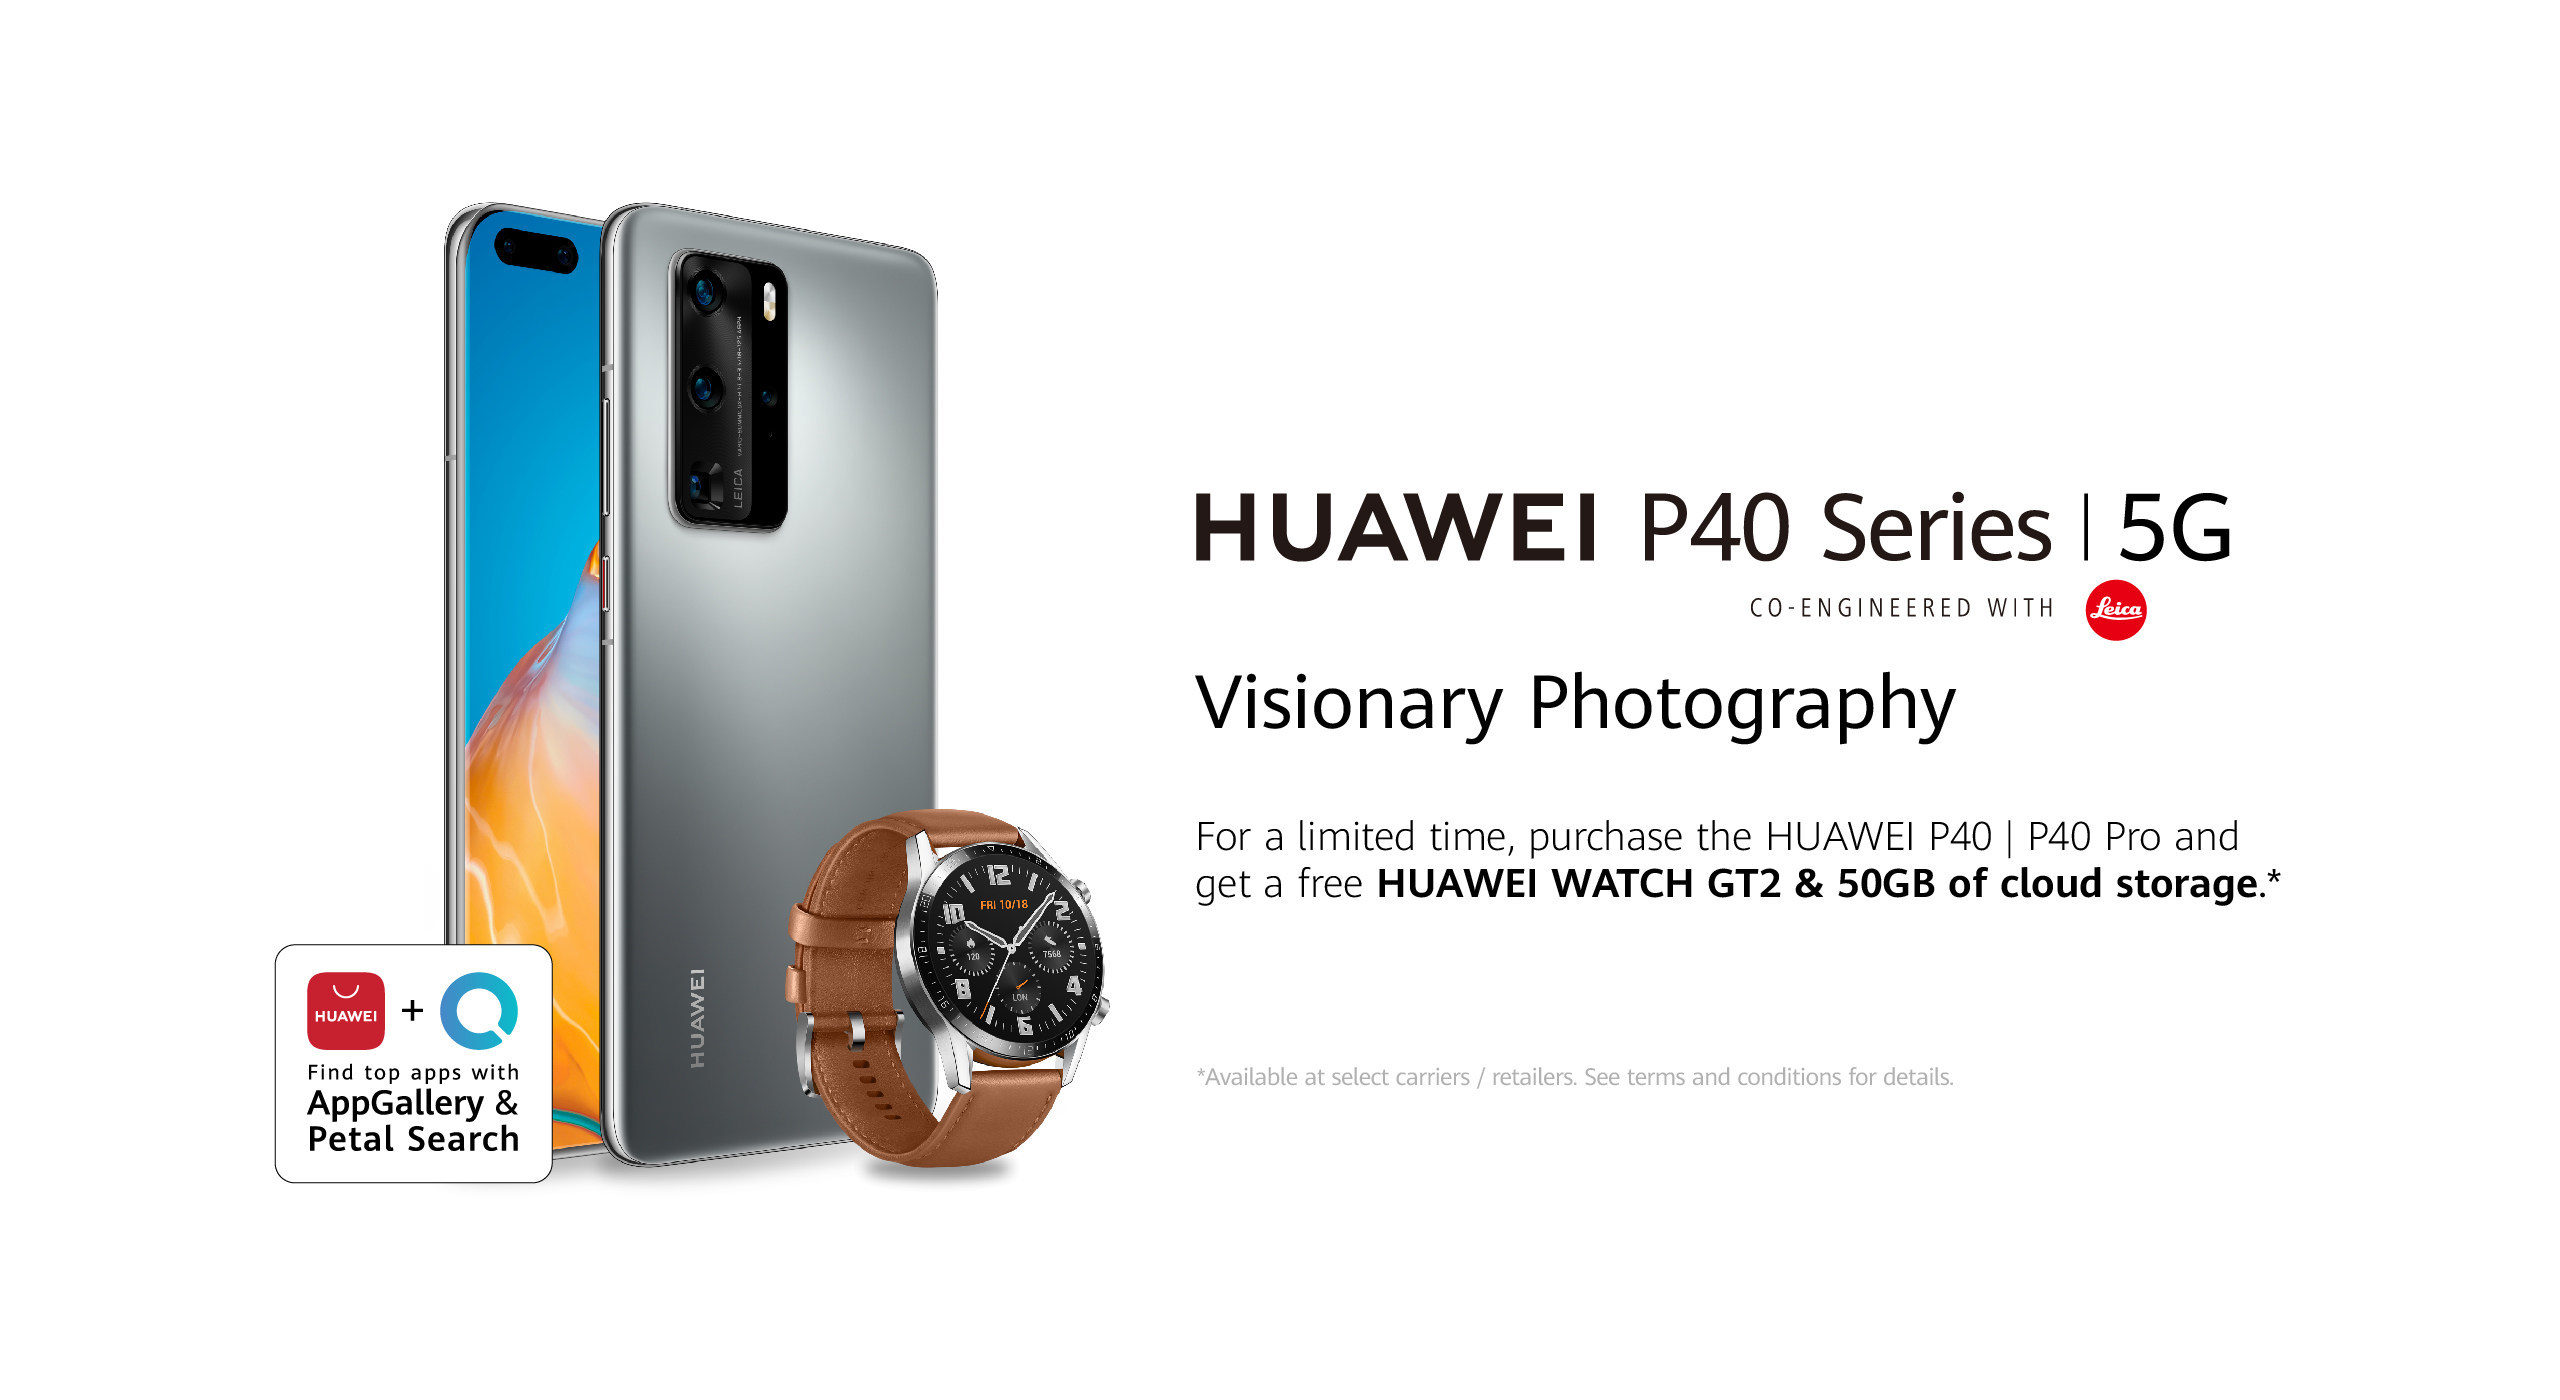 Huawei P40 Series 5g With World S Best Smartphone Camera And The New Huawei Appgallery And Petal Search Now Available In Canada - roblox logo evolution future edition s1 2 p1 8 youtube